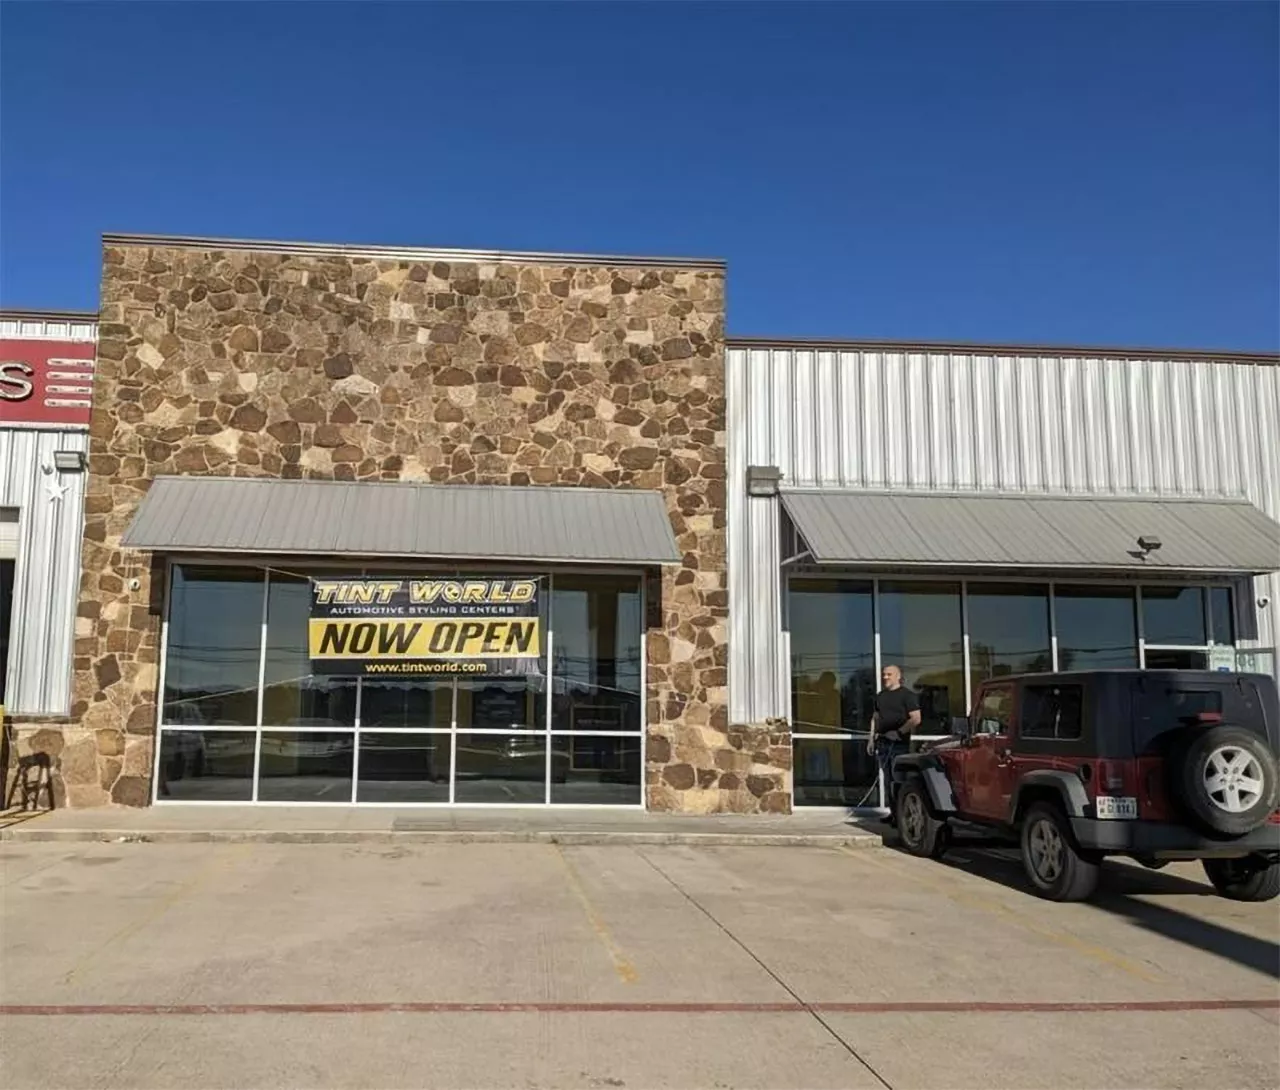 Tint World® Automotive Styling Centers™, a leading auto accessory and window tinting franchise, announces the opening of its new location in Buda, Texas. img#1